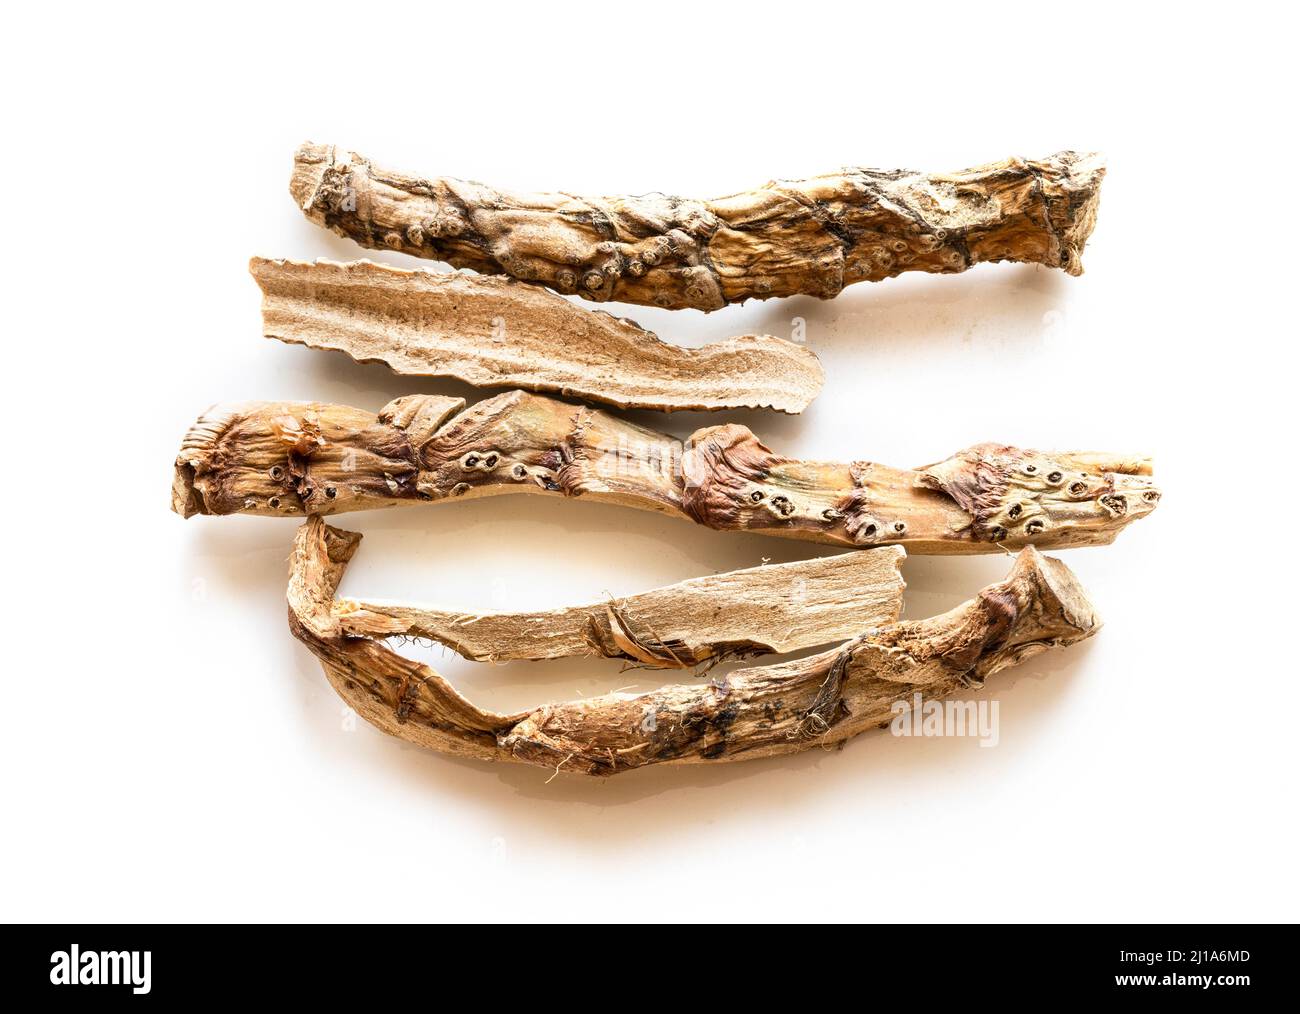 several pieces of dried Sweet flag (calamus) root on white plate Stock Photo